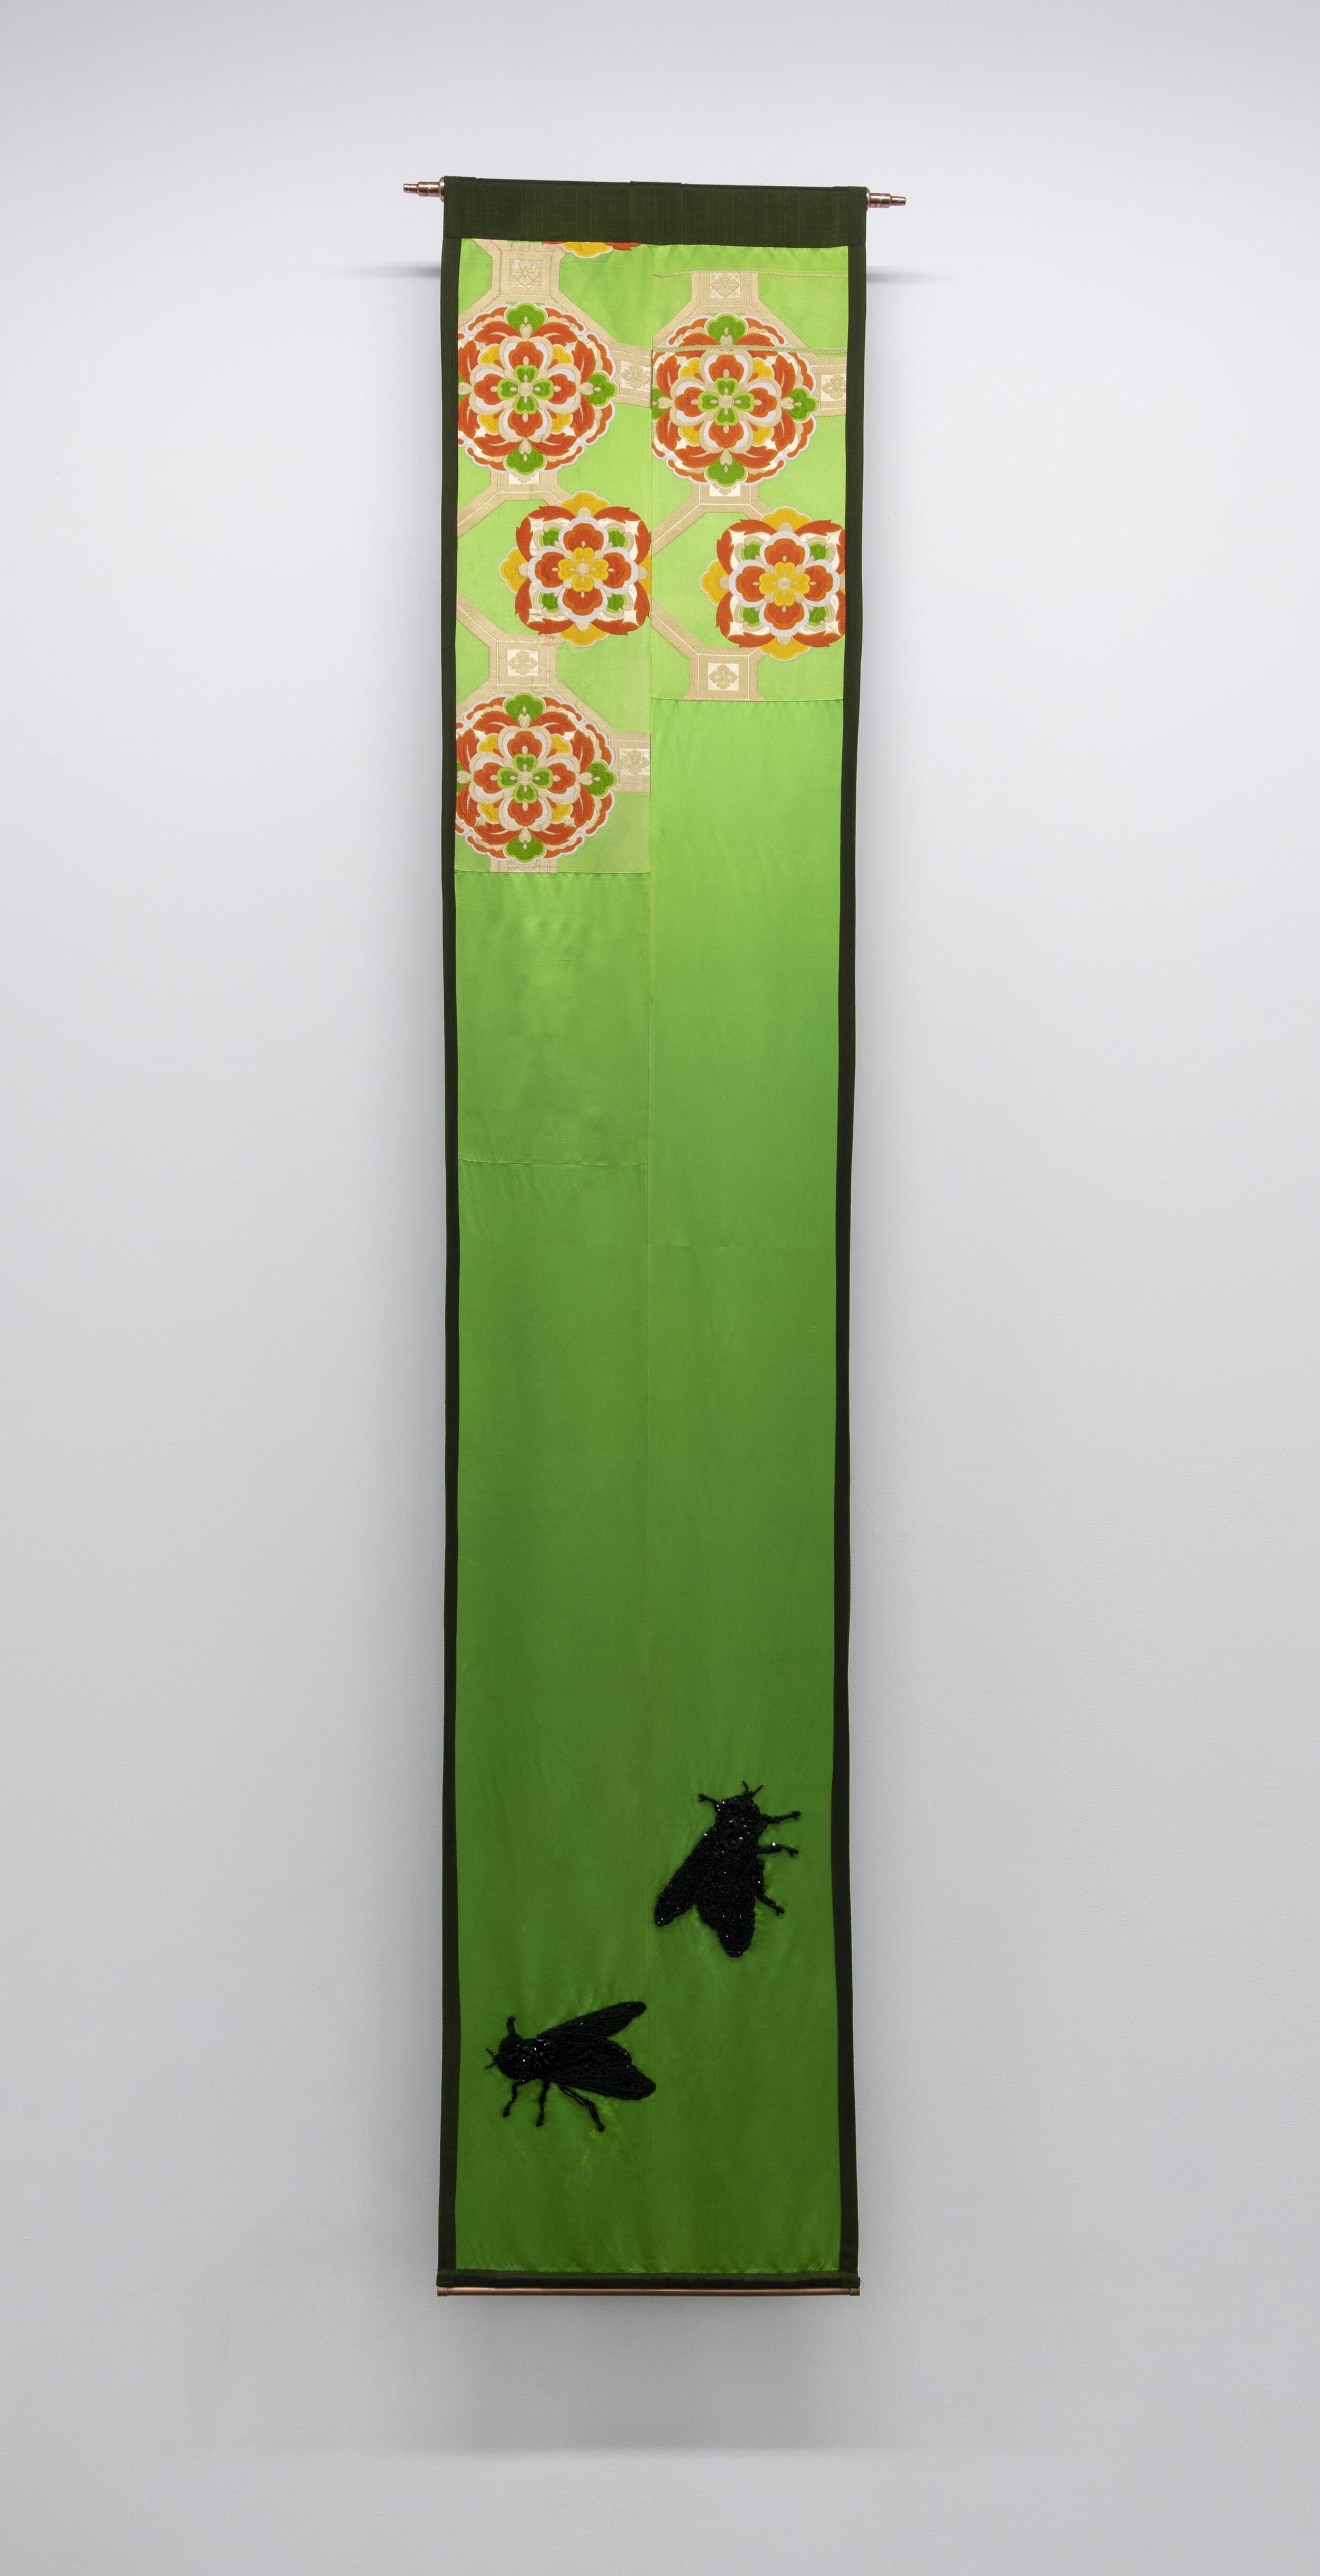  Joel Otterson  Flies on the Wall  , 2016 silk fabrics, black glass, onyx, spinel beads, copper plumbing and fitting 120 x 24 x 5 in (304.8 x 61 x 12.7 cm) 